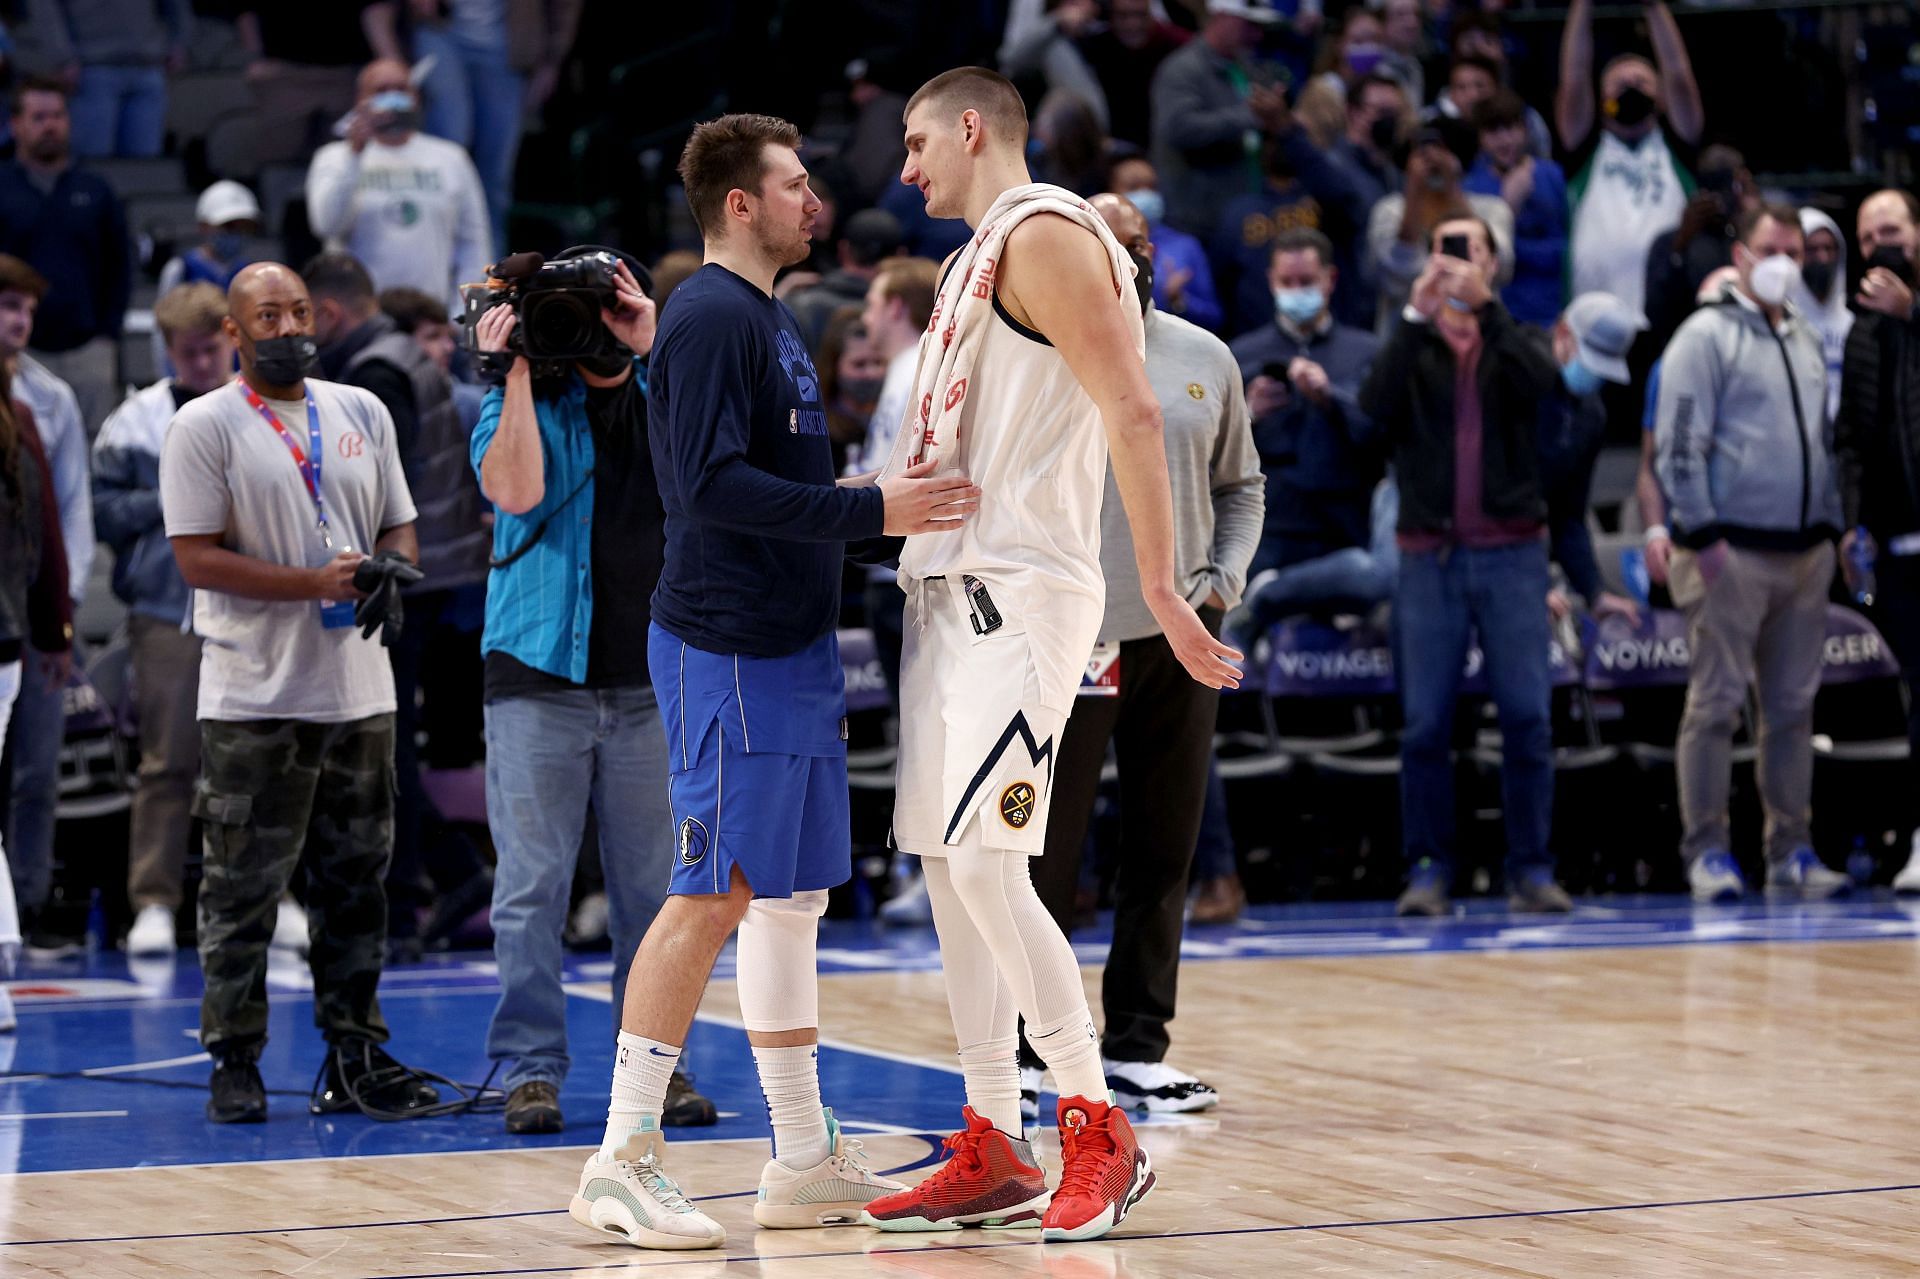 NBA analyst speculates Luka Doncic & Nikola Jokic teaming up: “Him and Luka are buddies, Jokic’s in the house”